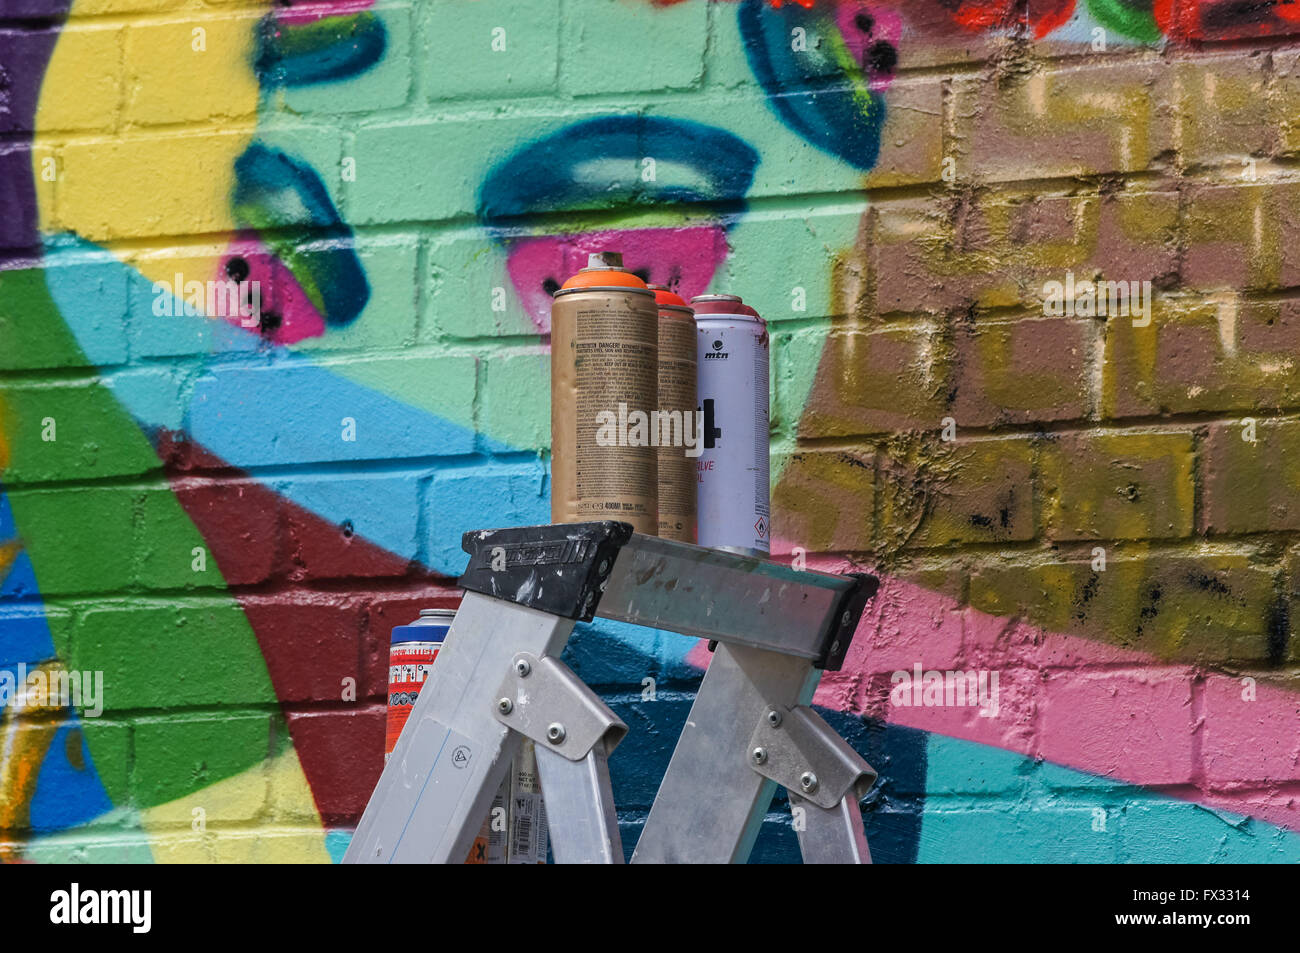 spray paint cans and graffiti mural Stock Photo